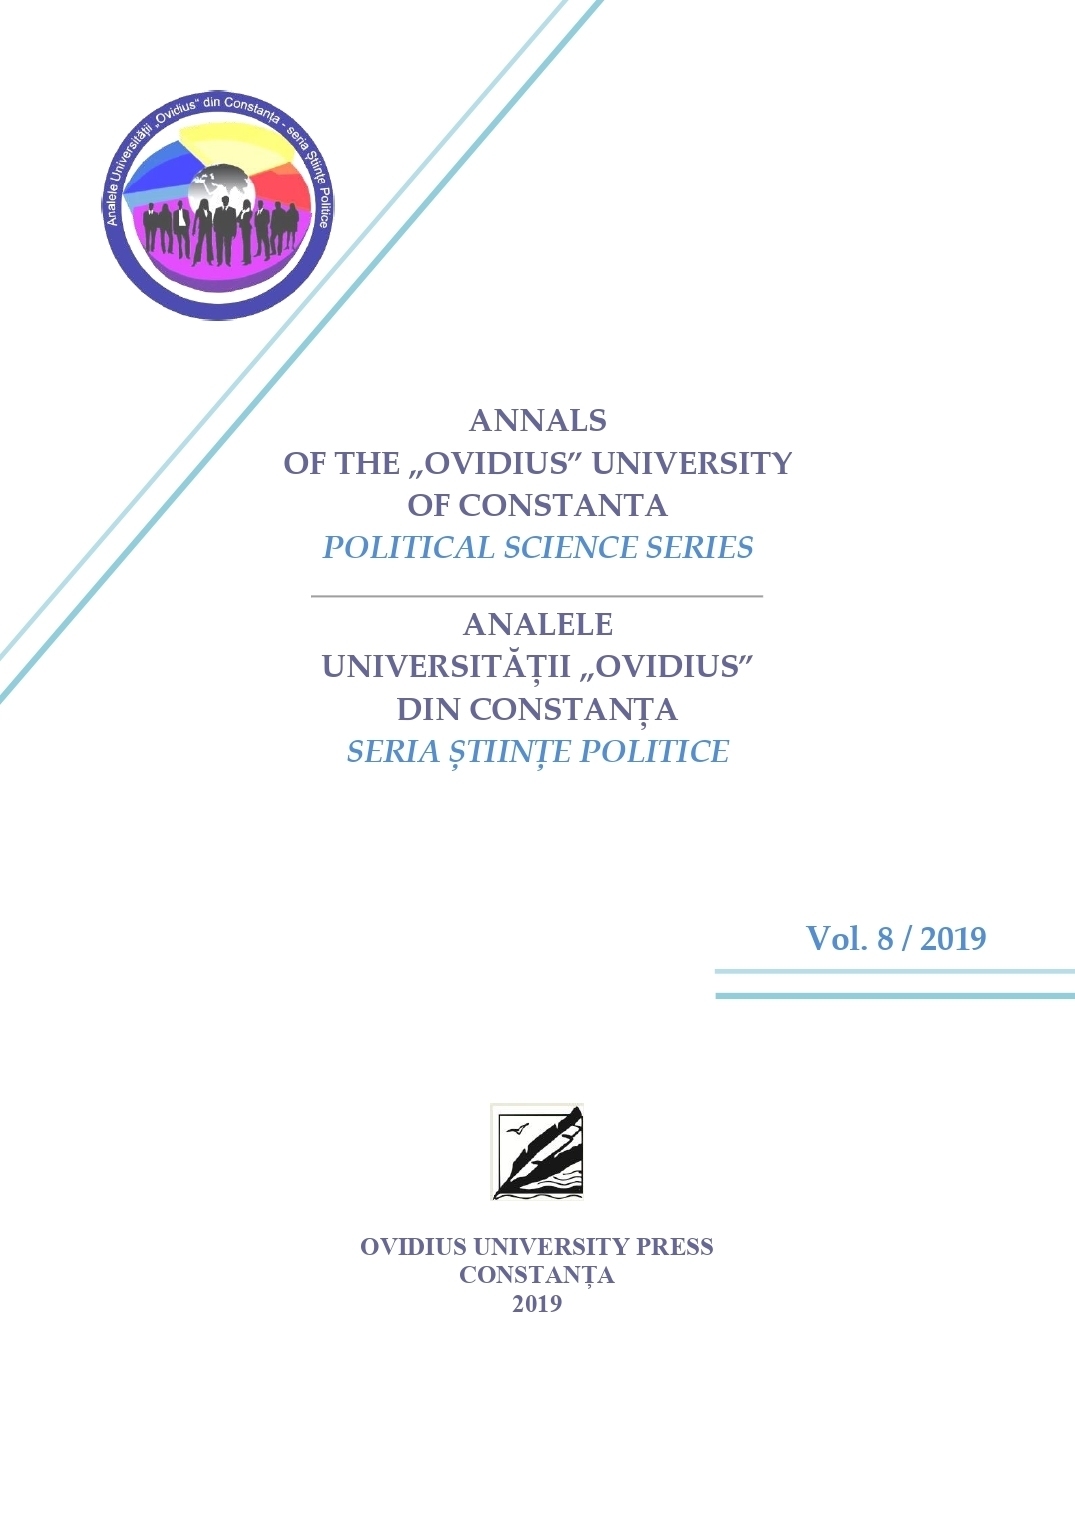 NON-VOTING AS A POLITICAL ACTION. 
THE BEHAVIOUR OF POLITICAL SCIENCE STUDENTS REGARDING THE REFERENDUM FOR THE “TRADITIONAL FAMILY” IN ROMANIA, 2018